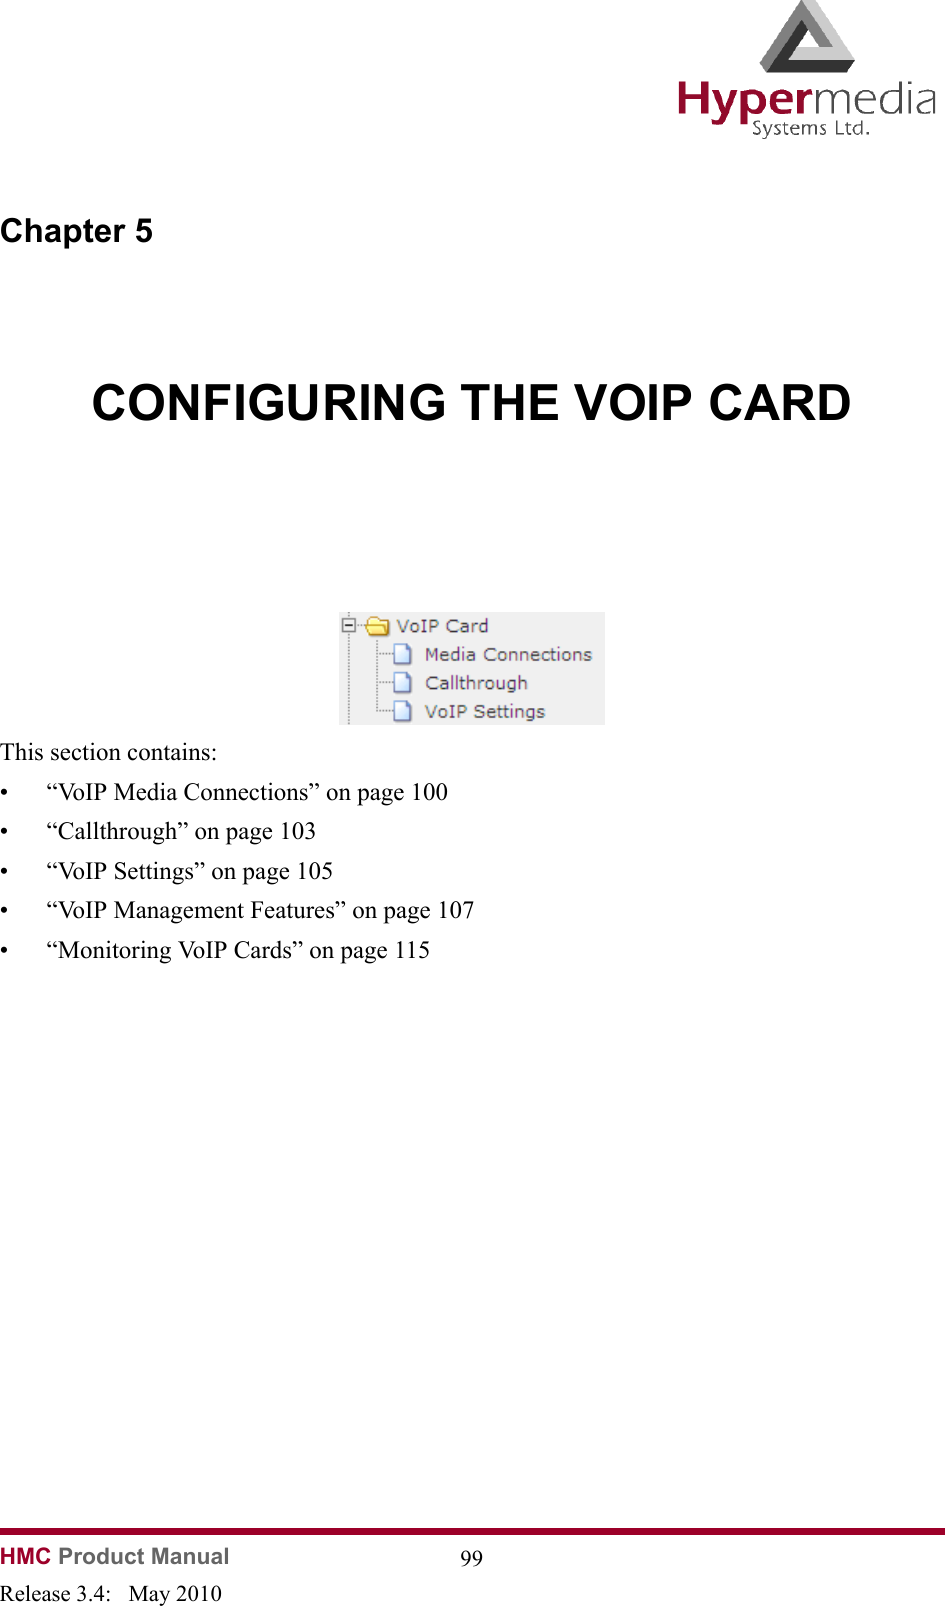 HMC Product Manual  99Release 3.4:   May 2010Chapter 5CONFIGURING THE VOIP CARD              This section contains:• “VoIP Media Connections” on page 100• “Callthrough” on page 103• “VoIP Settings” on page 105• “VoIP Management Features” on page 107• “Monitoring VoIP Cards” on page 115